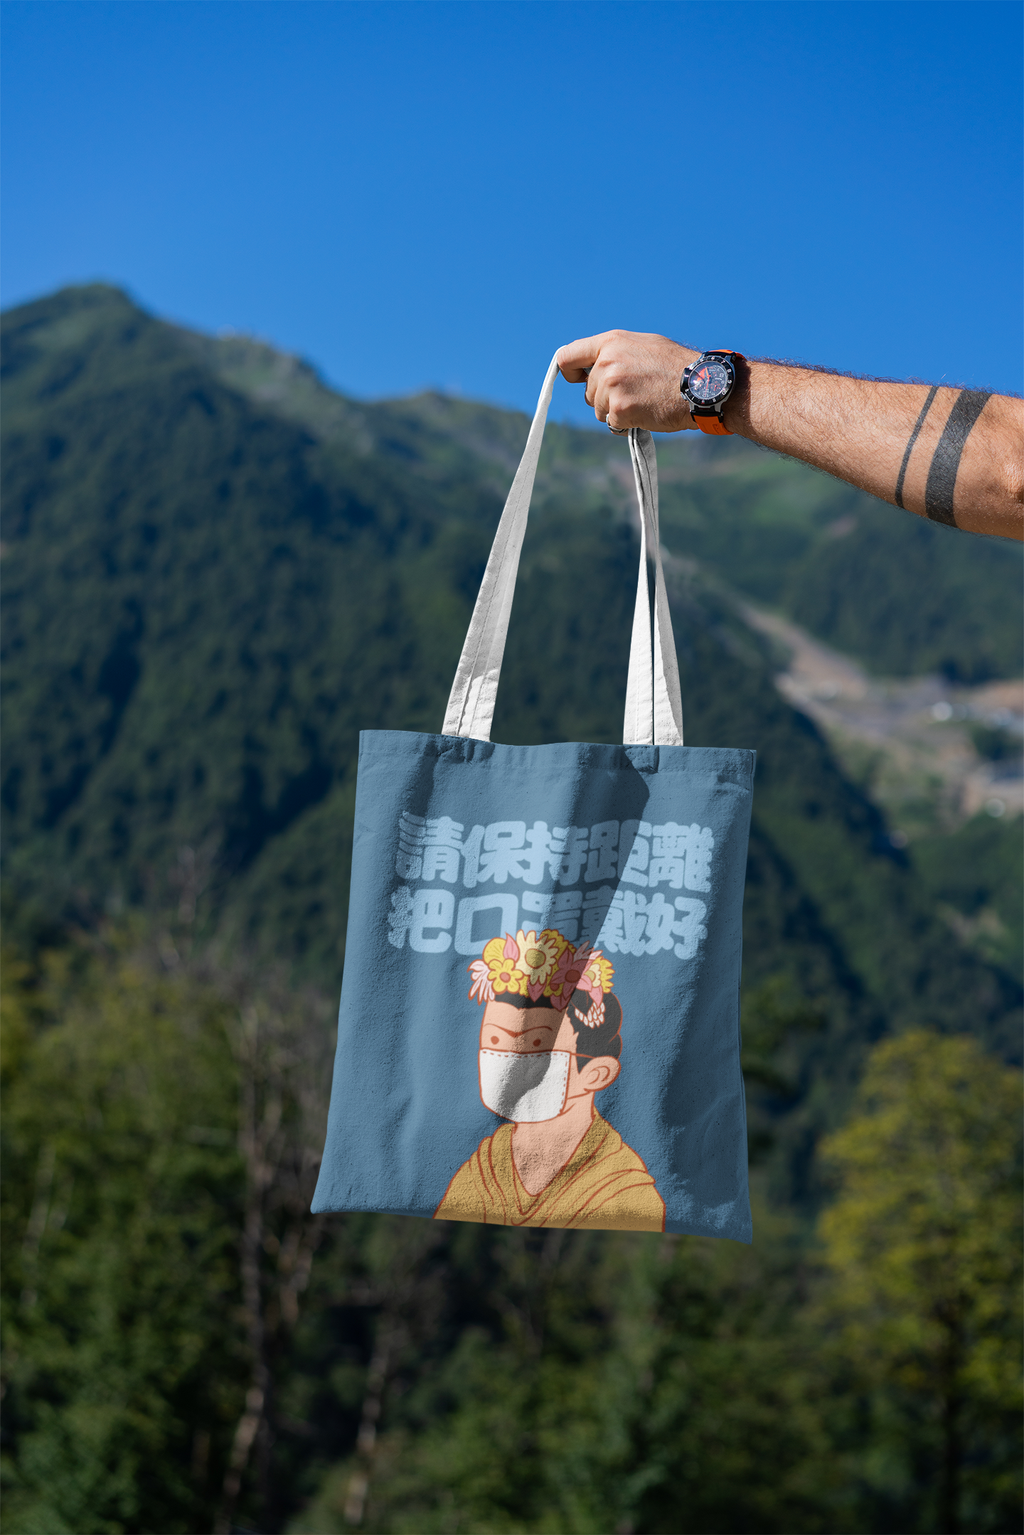 mockup-featuring-a-man-s-hand-holding-a-tote-bag-against-a-natural-scenery-3131-el1 (34).png